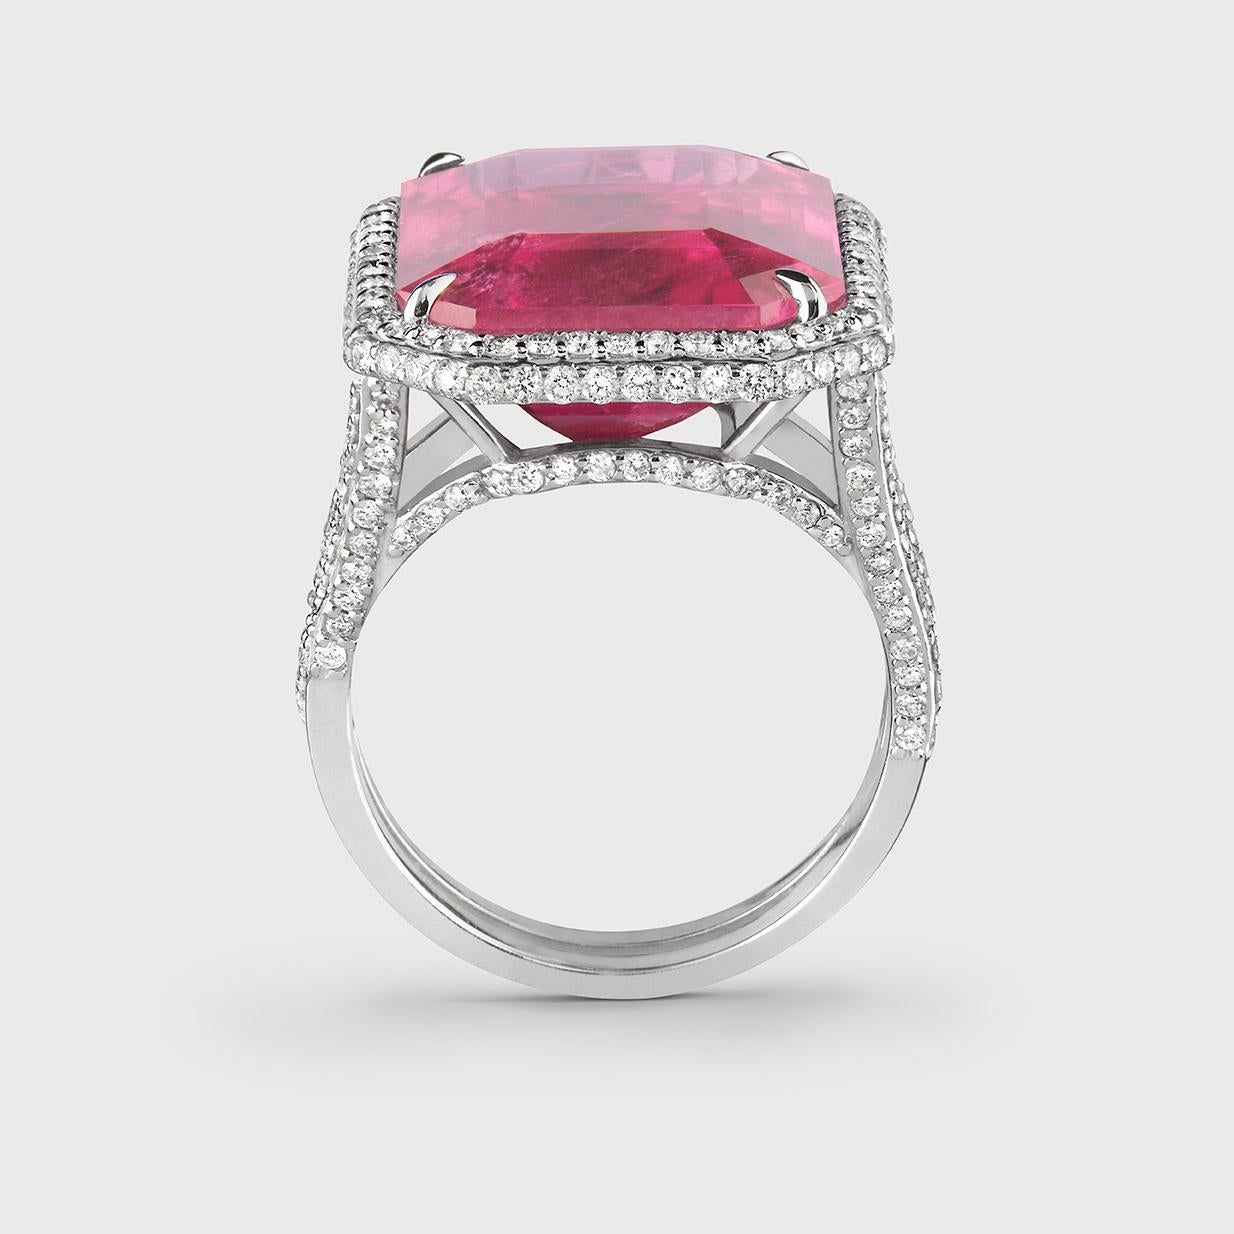 Emerald Cut 13.6 Carats Rubellite and Diamond Cocktail Ring Handcrafted in 18k White Gold For Sale